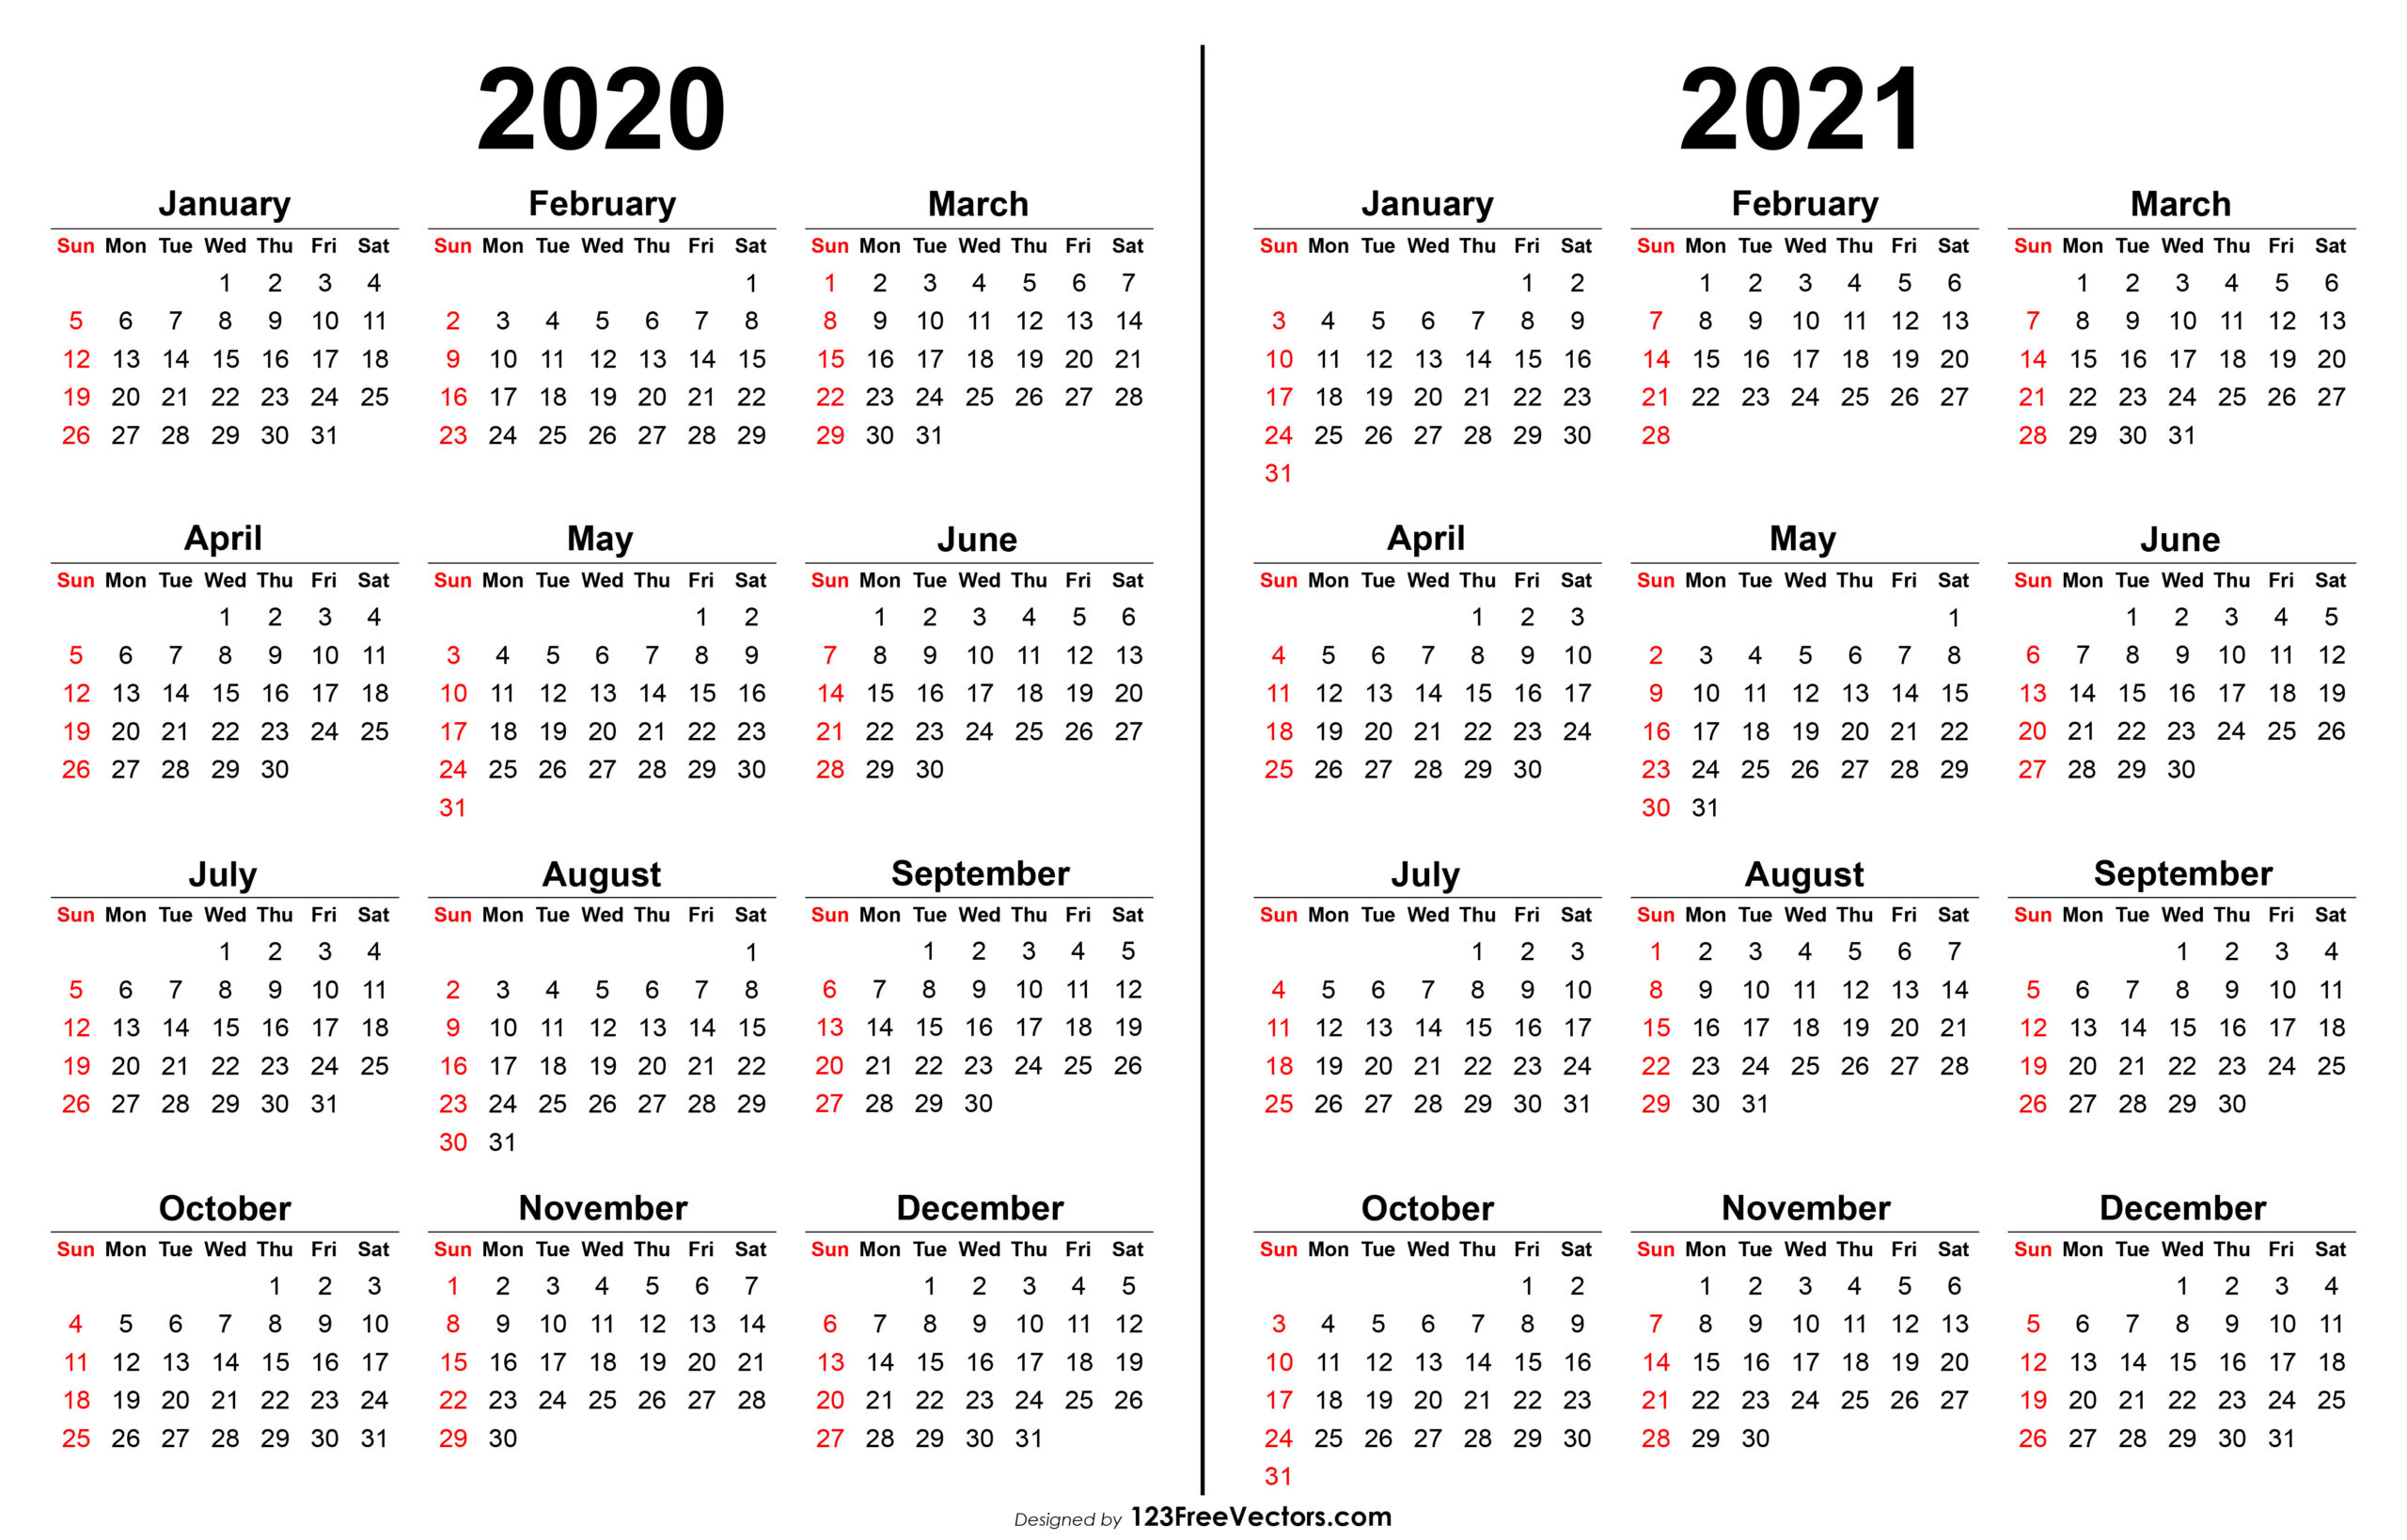 Calendar 2020 To 2021 | Calendar Printables Free Templates  May 31St Each Year Is What On The Financial Callendar